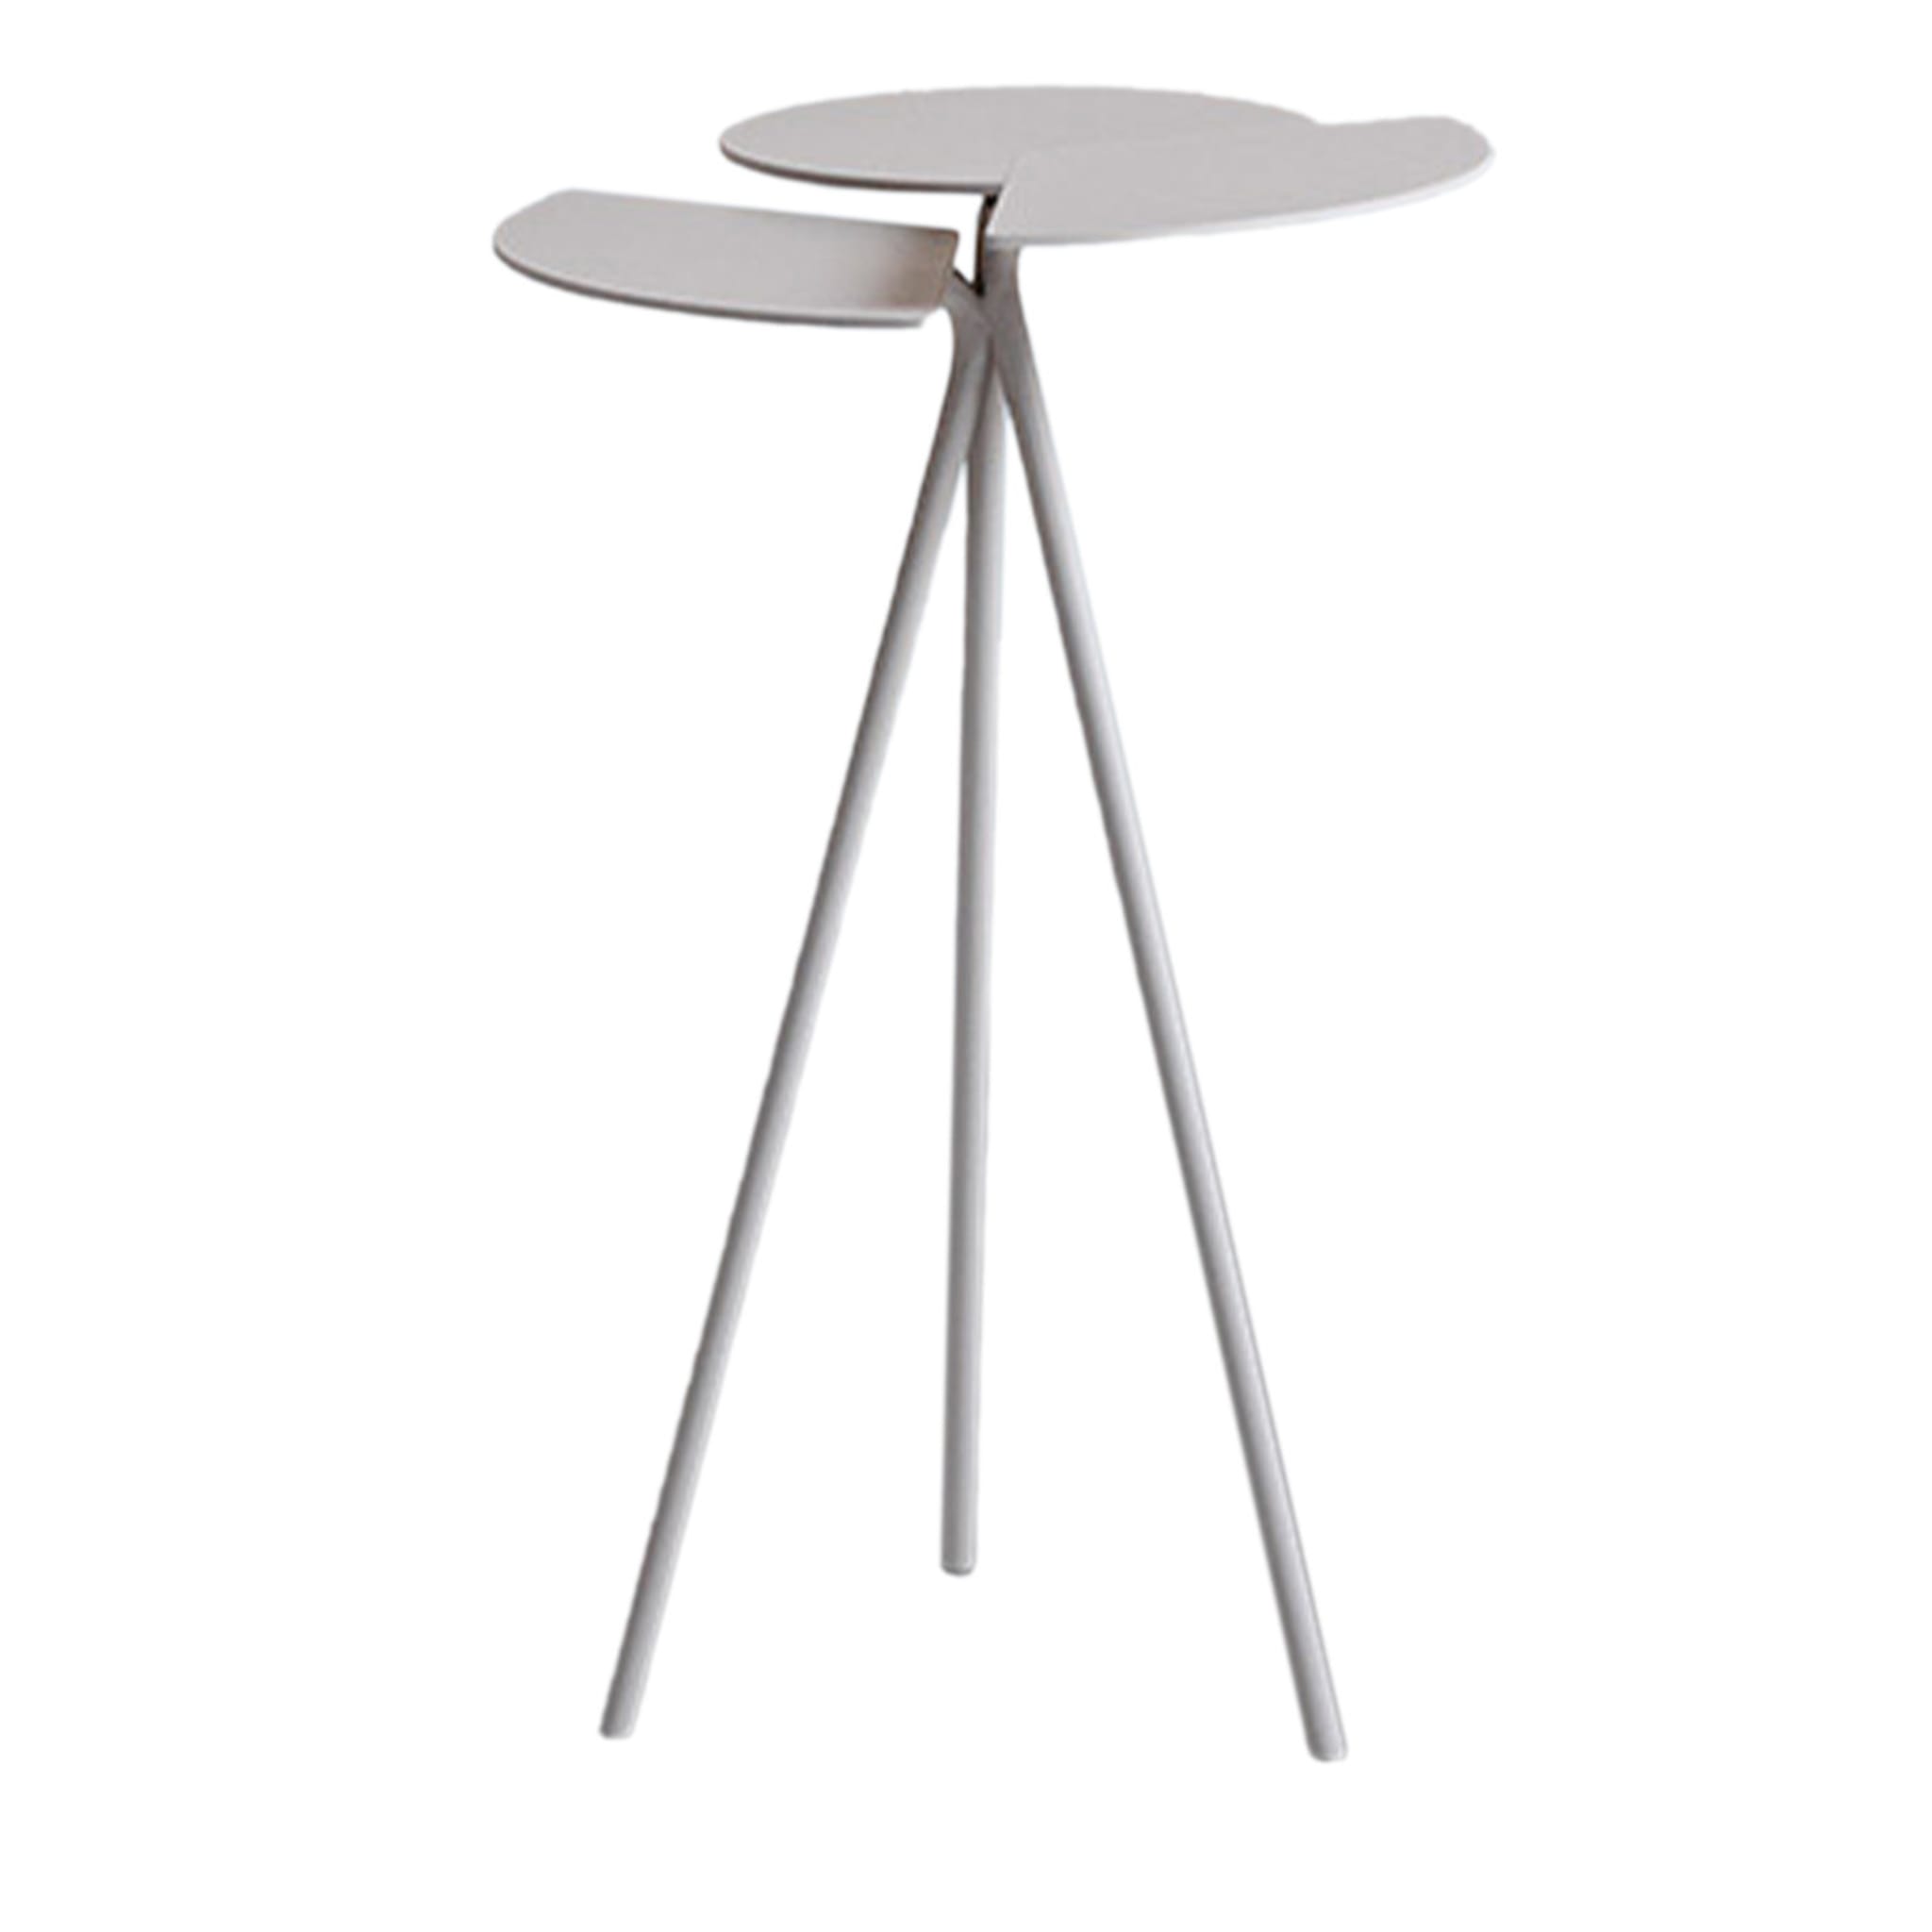 Lady Bug Beige Accent Table by Angeletti Ruzza - Main view